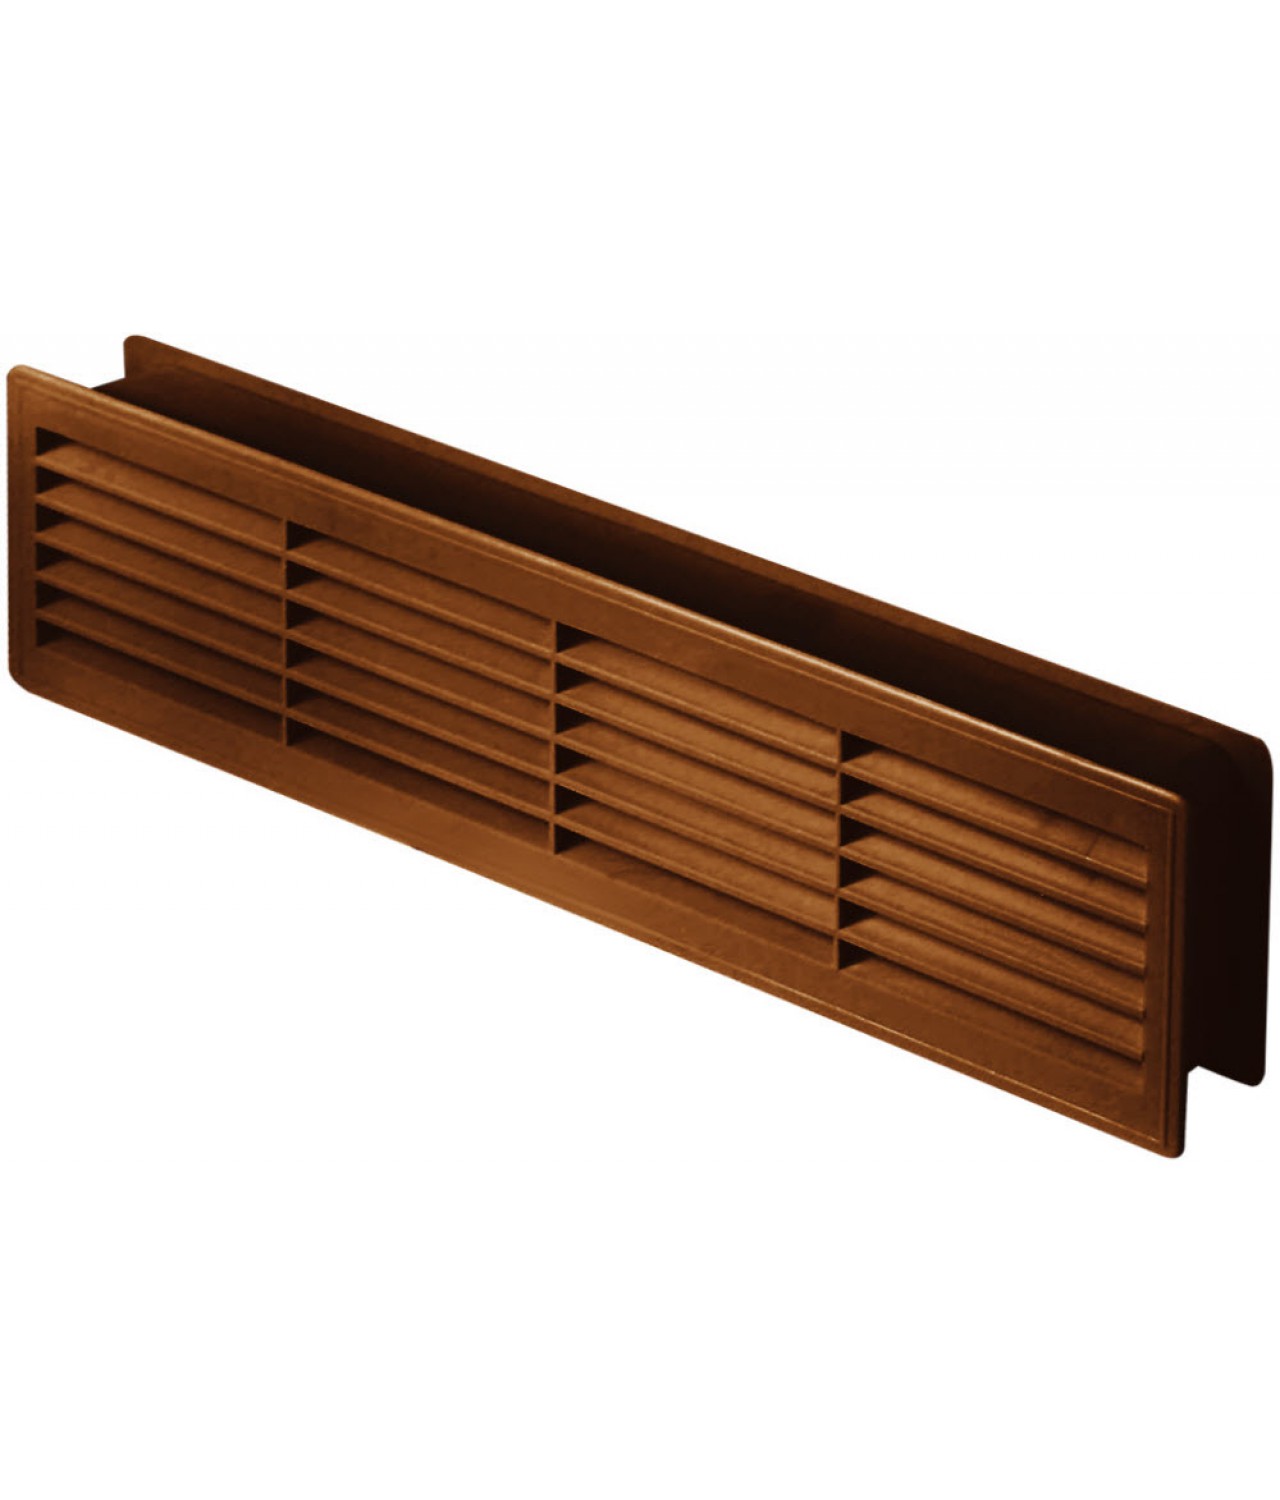 Door louver kit, old gold